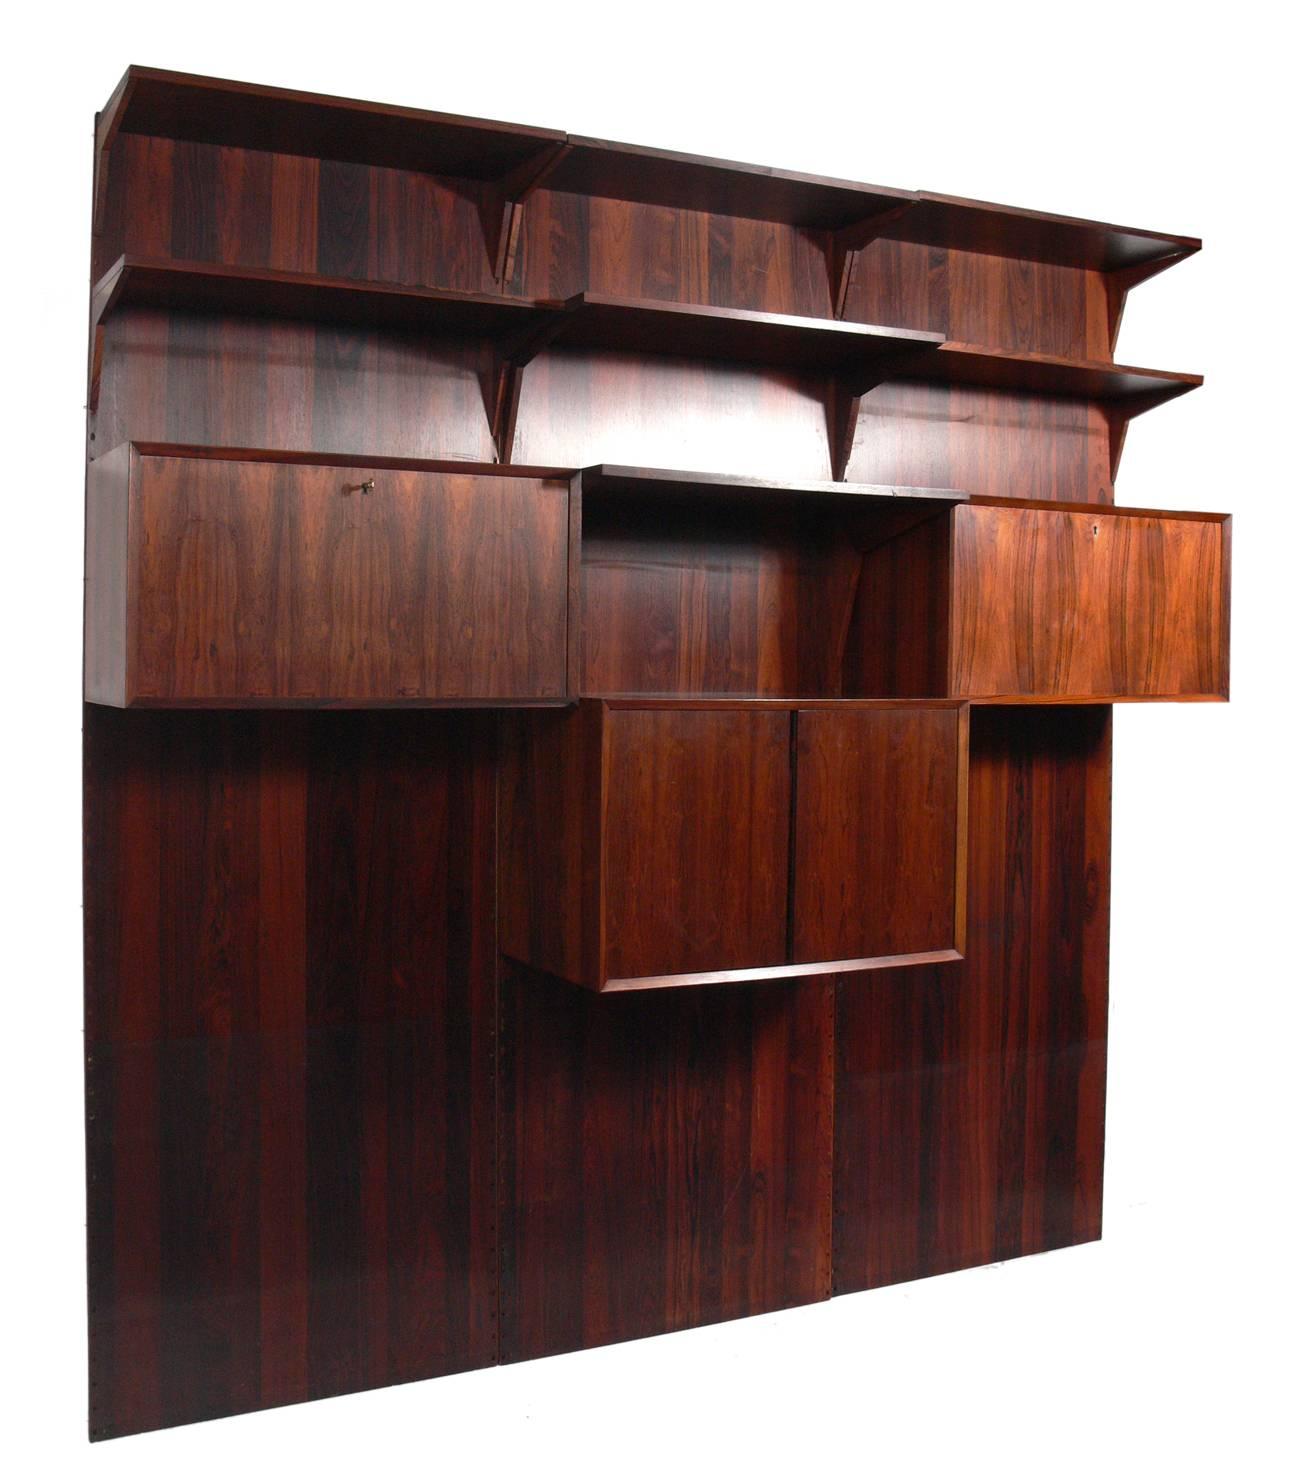 Danish modern rosewood wall unit by Poul Cadovius, Denmark, circa 1960s. Beautiful graining to the rosewood. This piece is completely adjustable and any of the case pieces or shelves can be installed anywhere up and down the wall-mounted panels.